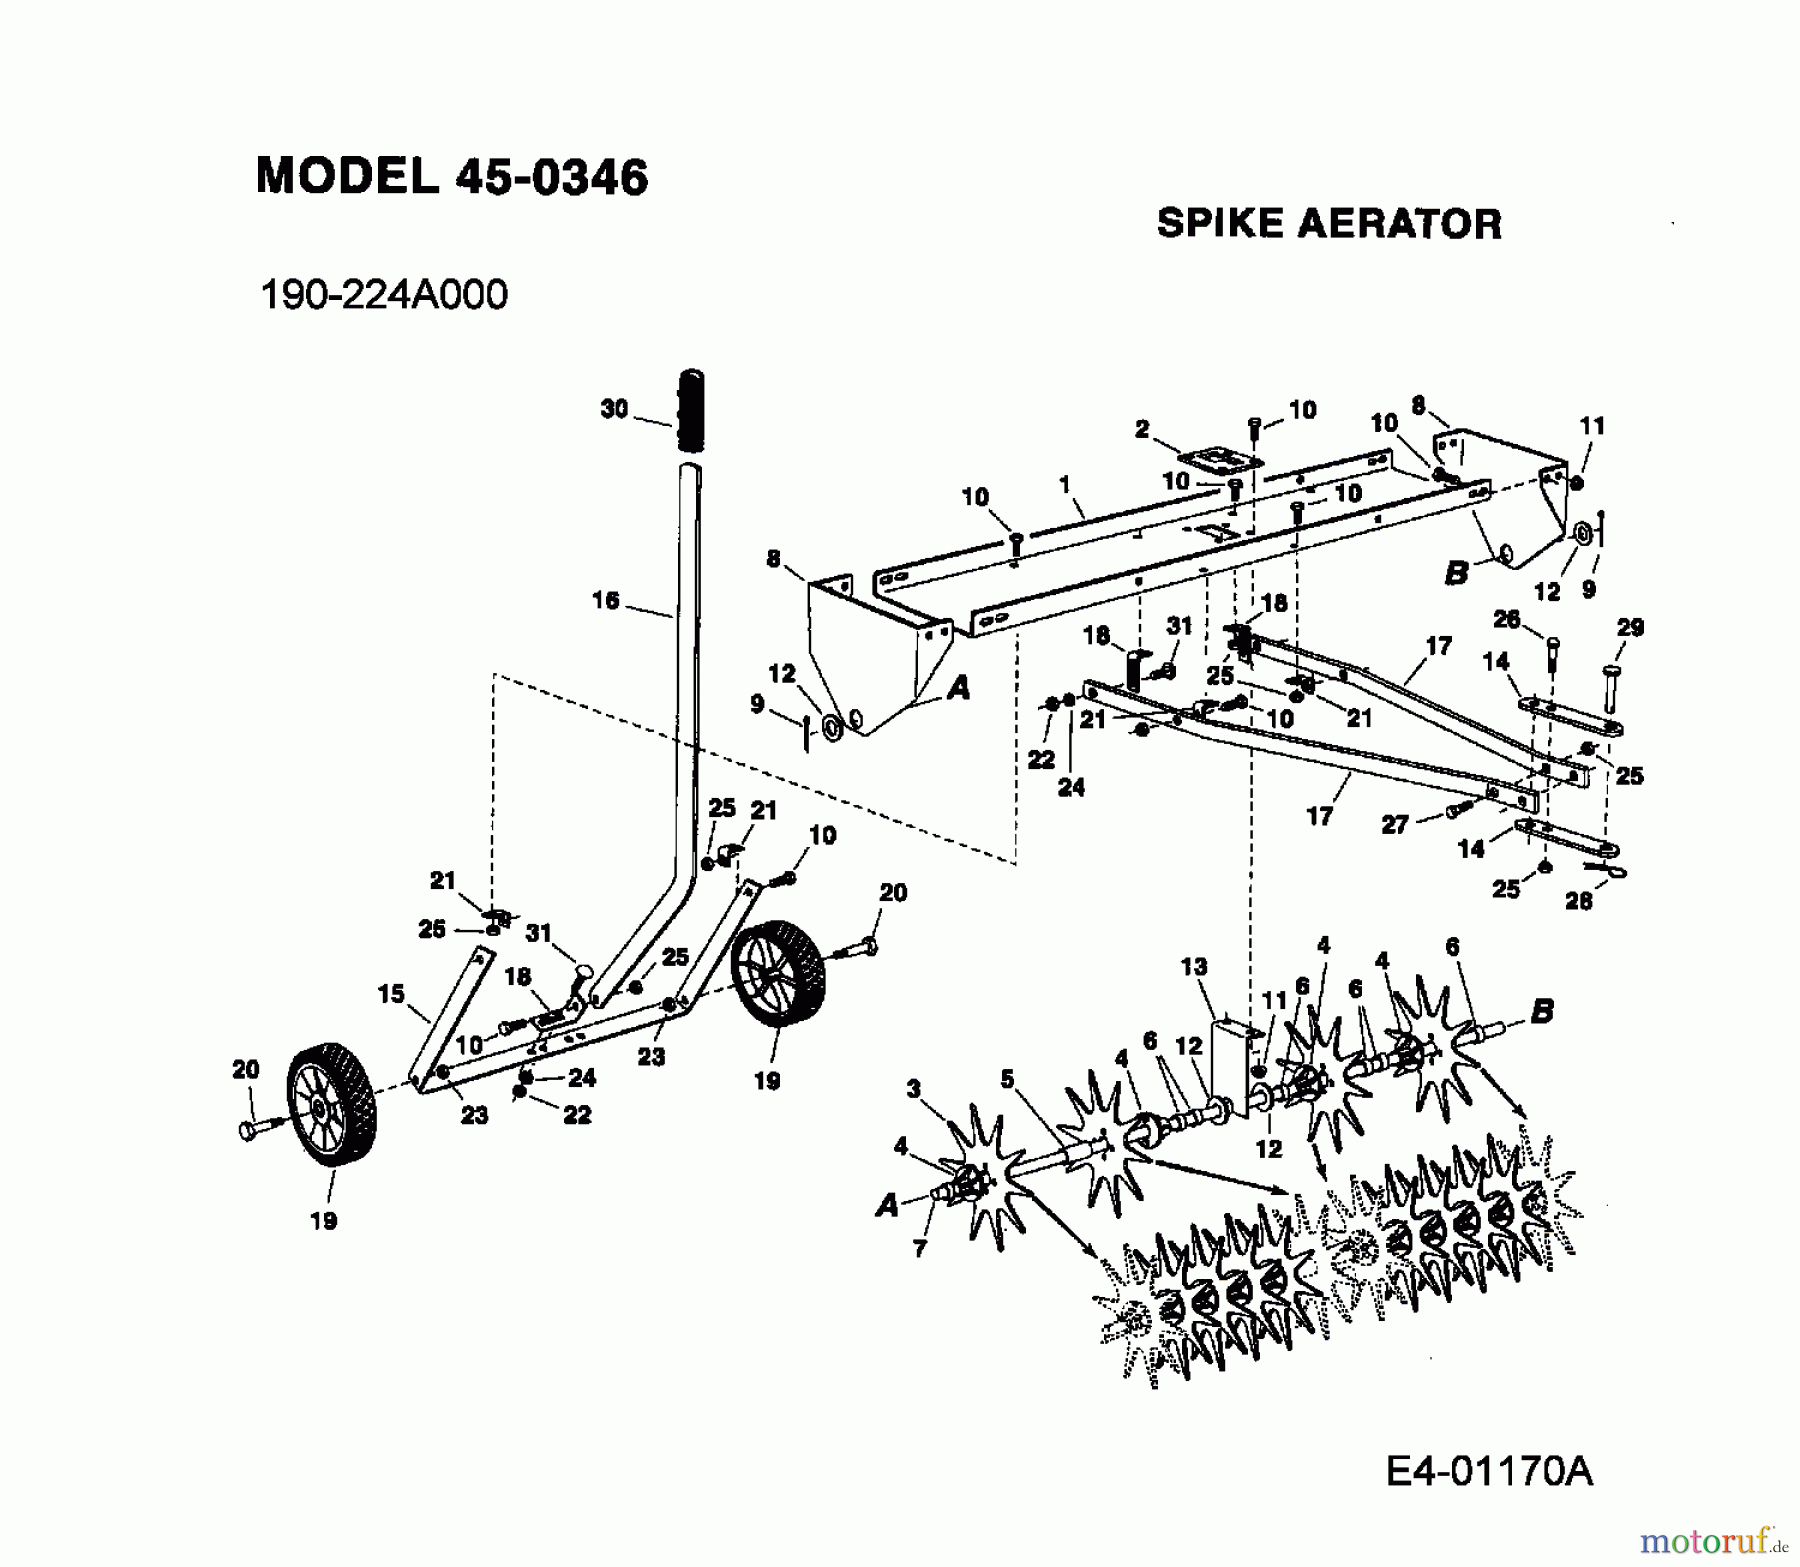  MTD Accessories Accessories garden and lawn tractors Groomer 45-0346  (190-224A000) 190-224A000  (2006) Basic machine